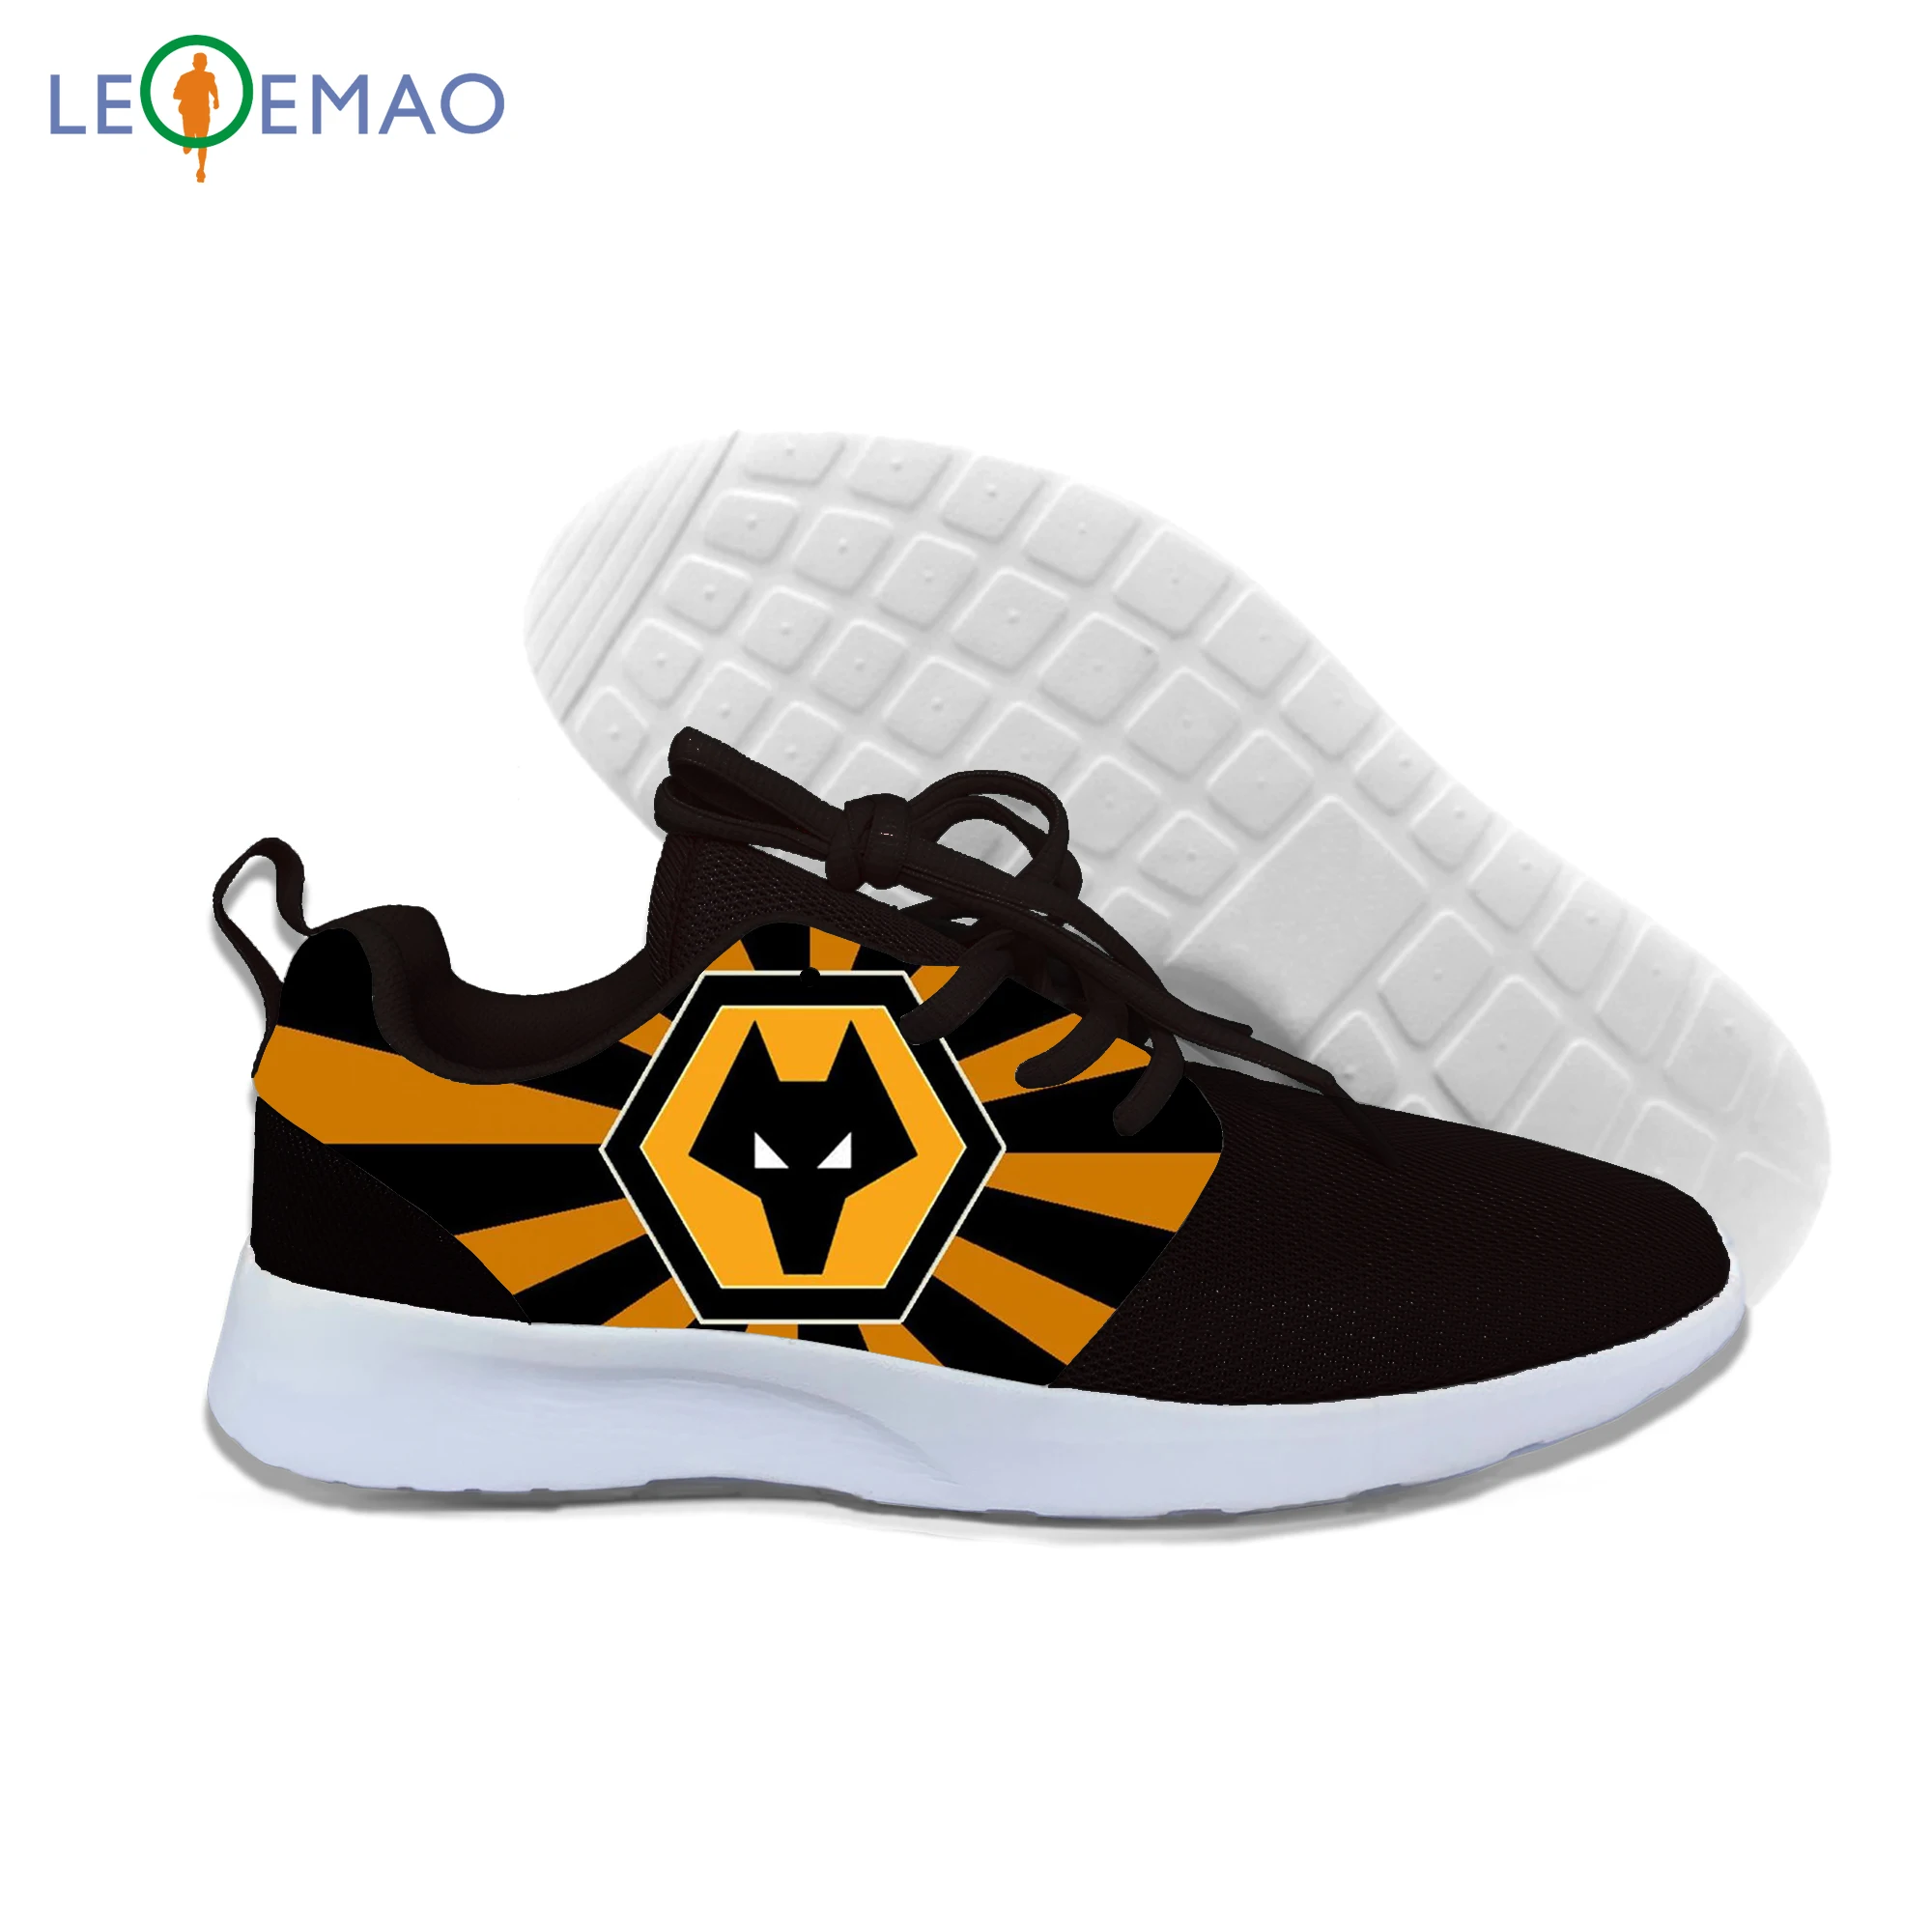 

Personality Running Shoes Adults Wolverhampton Wanderers Quality Casual Shoes Lightweight Walking Lace-Up Gym Casual Sneaker